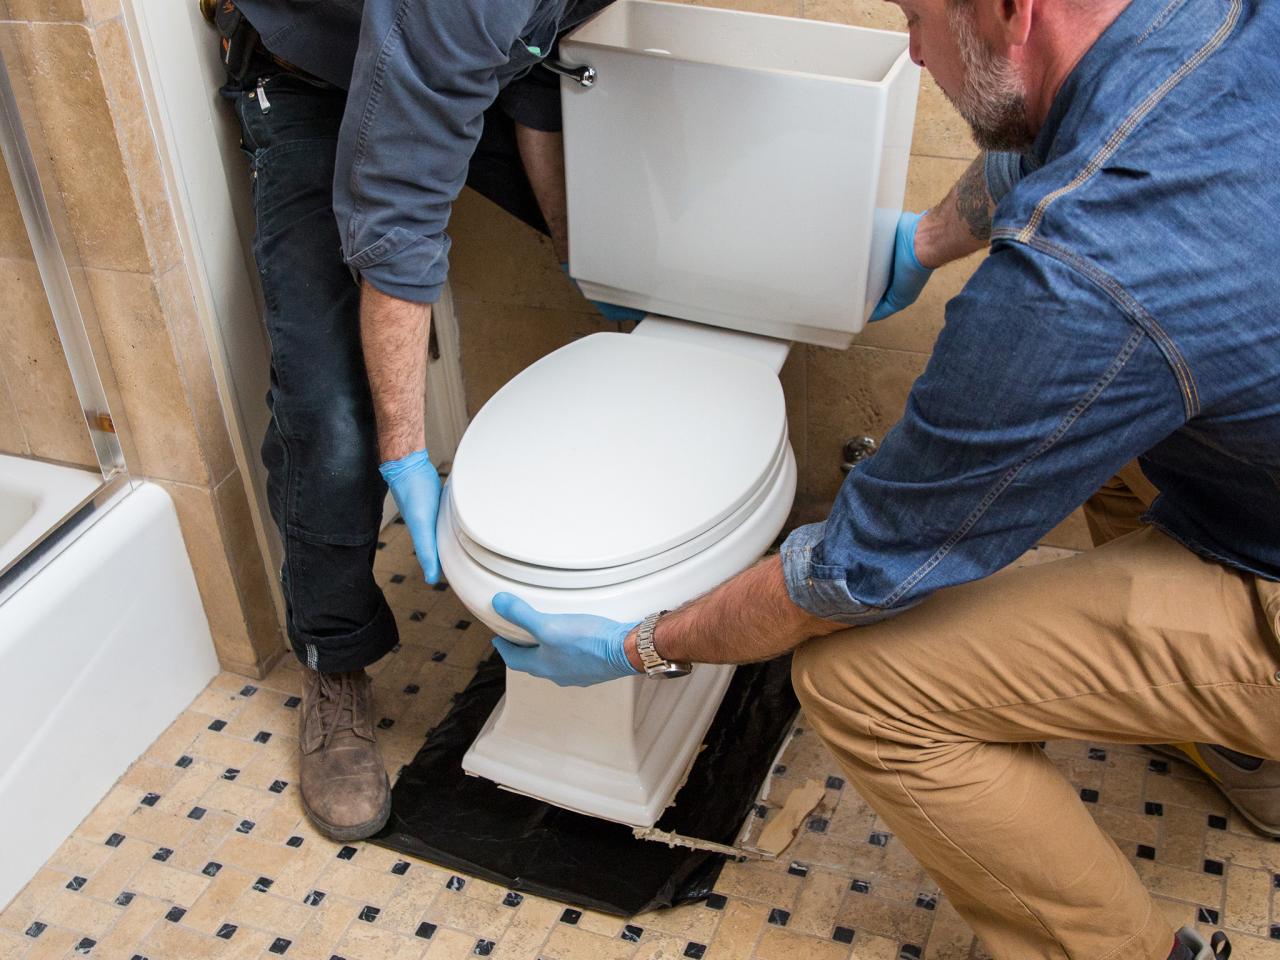 How To Replace A Toilet Bowl?